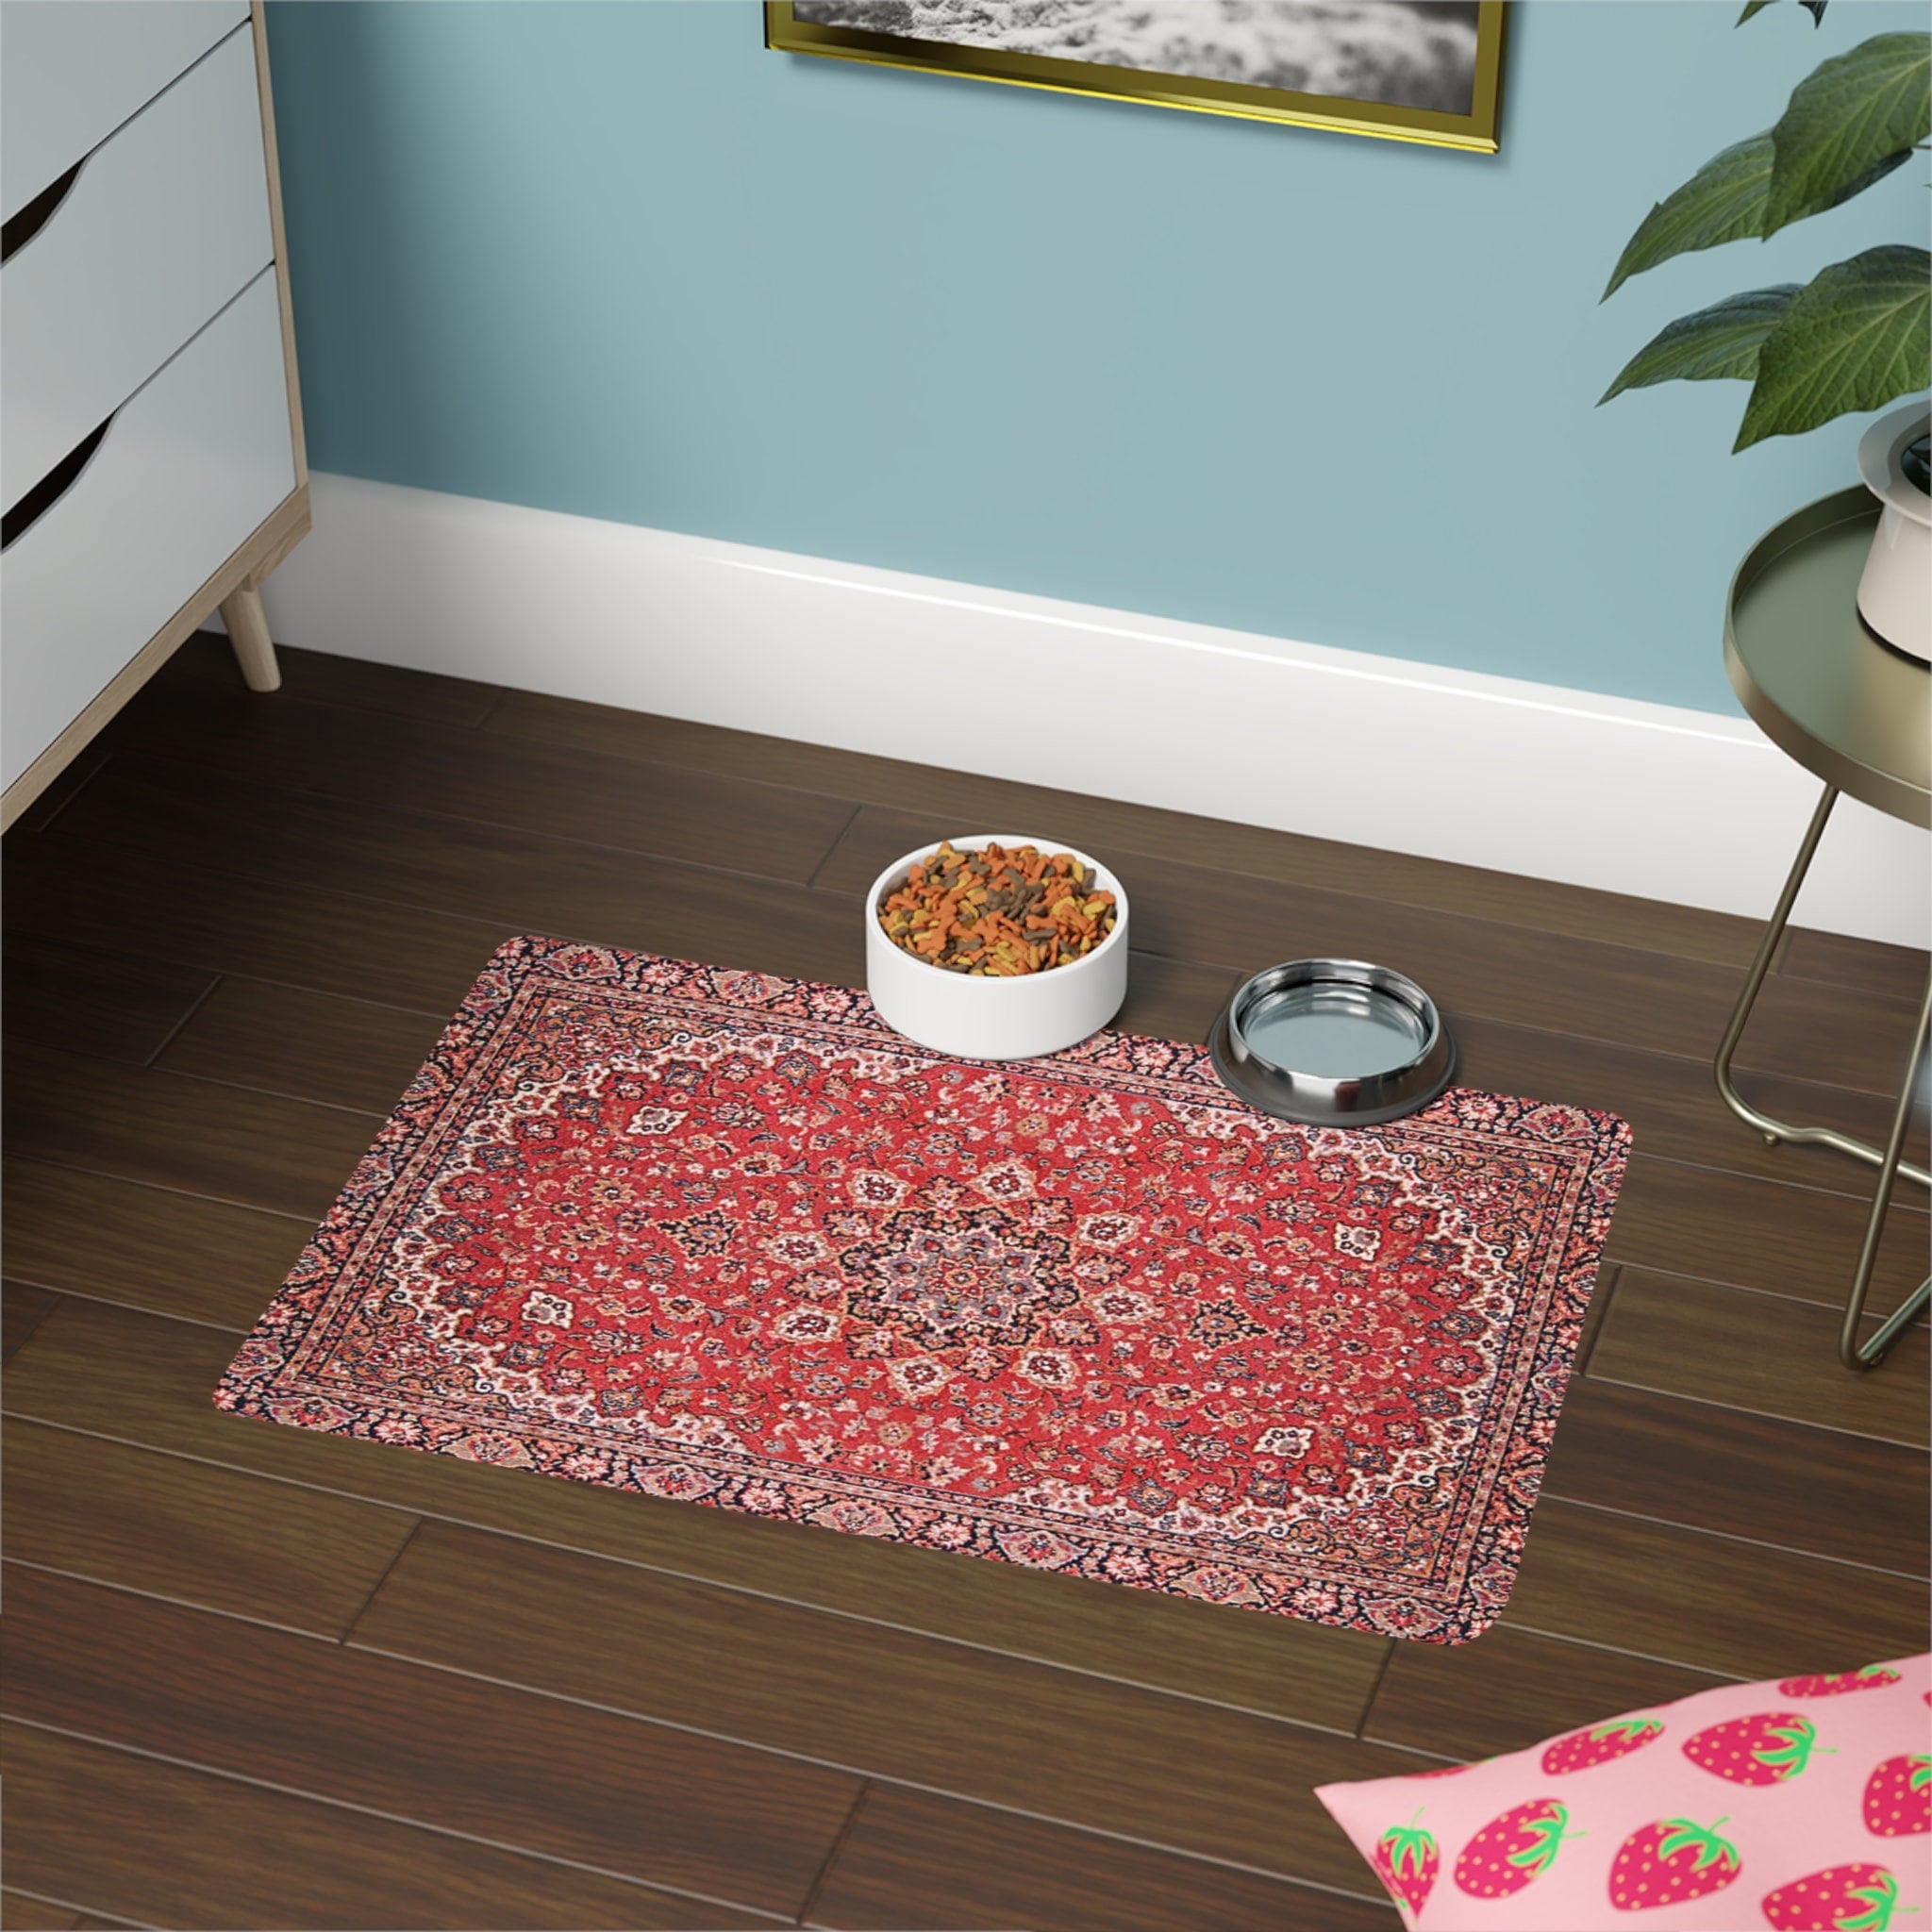 16 x 28 Drymate Pet Bowl Placemat with Slip Resistant Backing - Jeffers